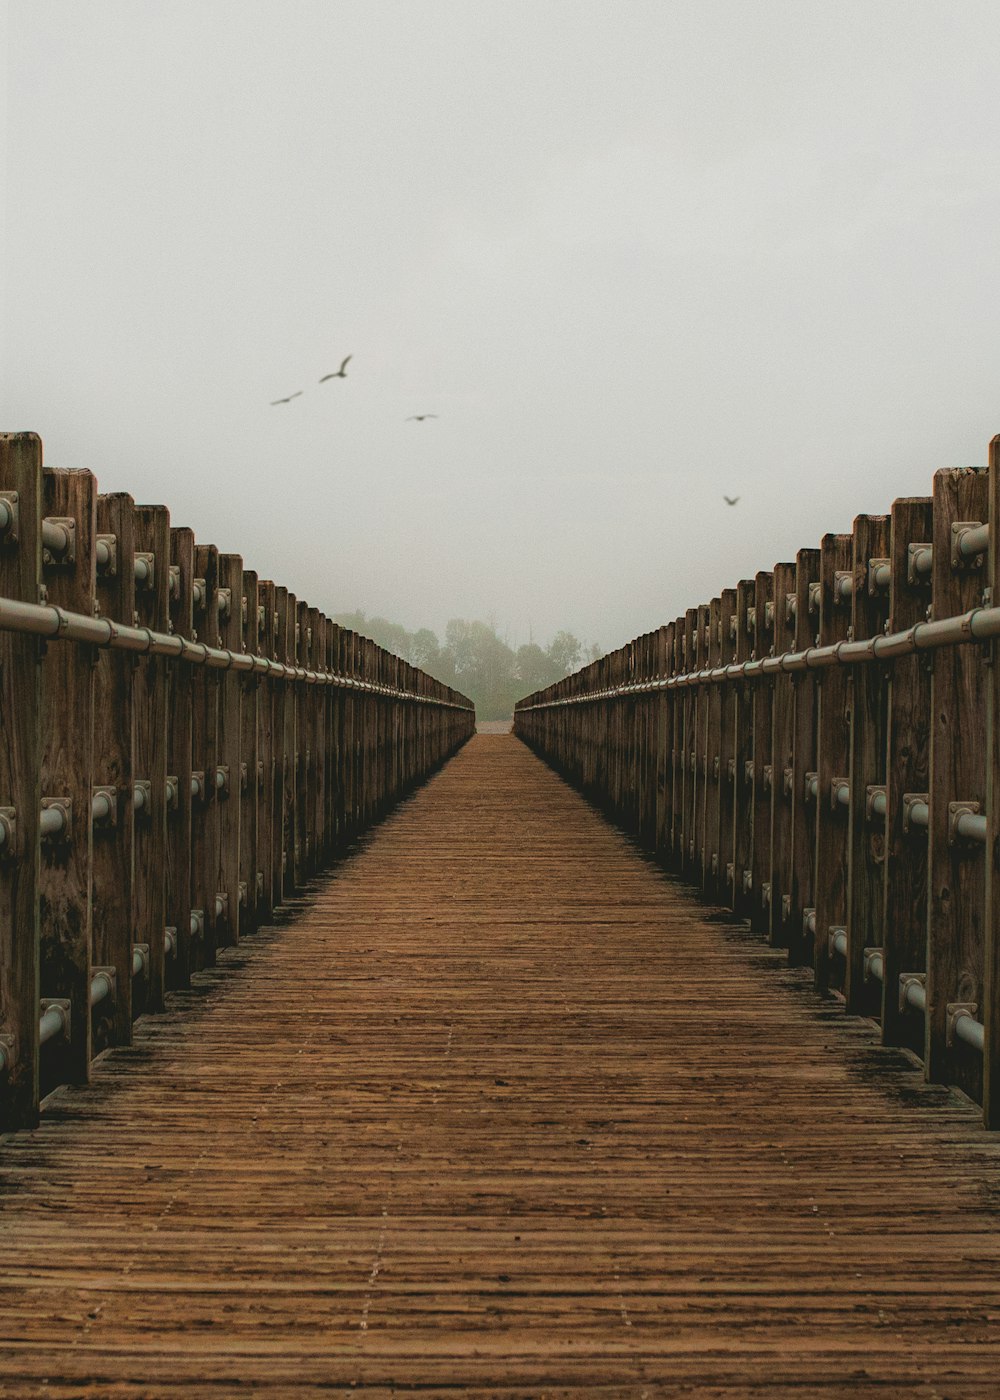 a wooden bridge with birds flying over it